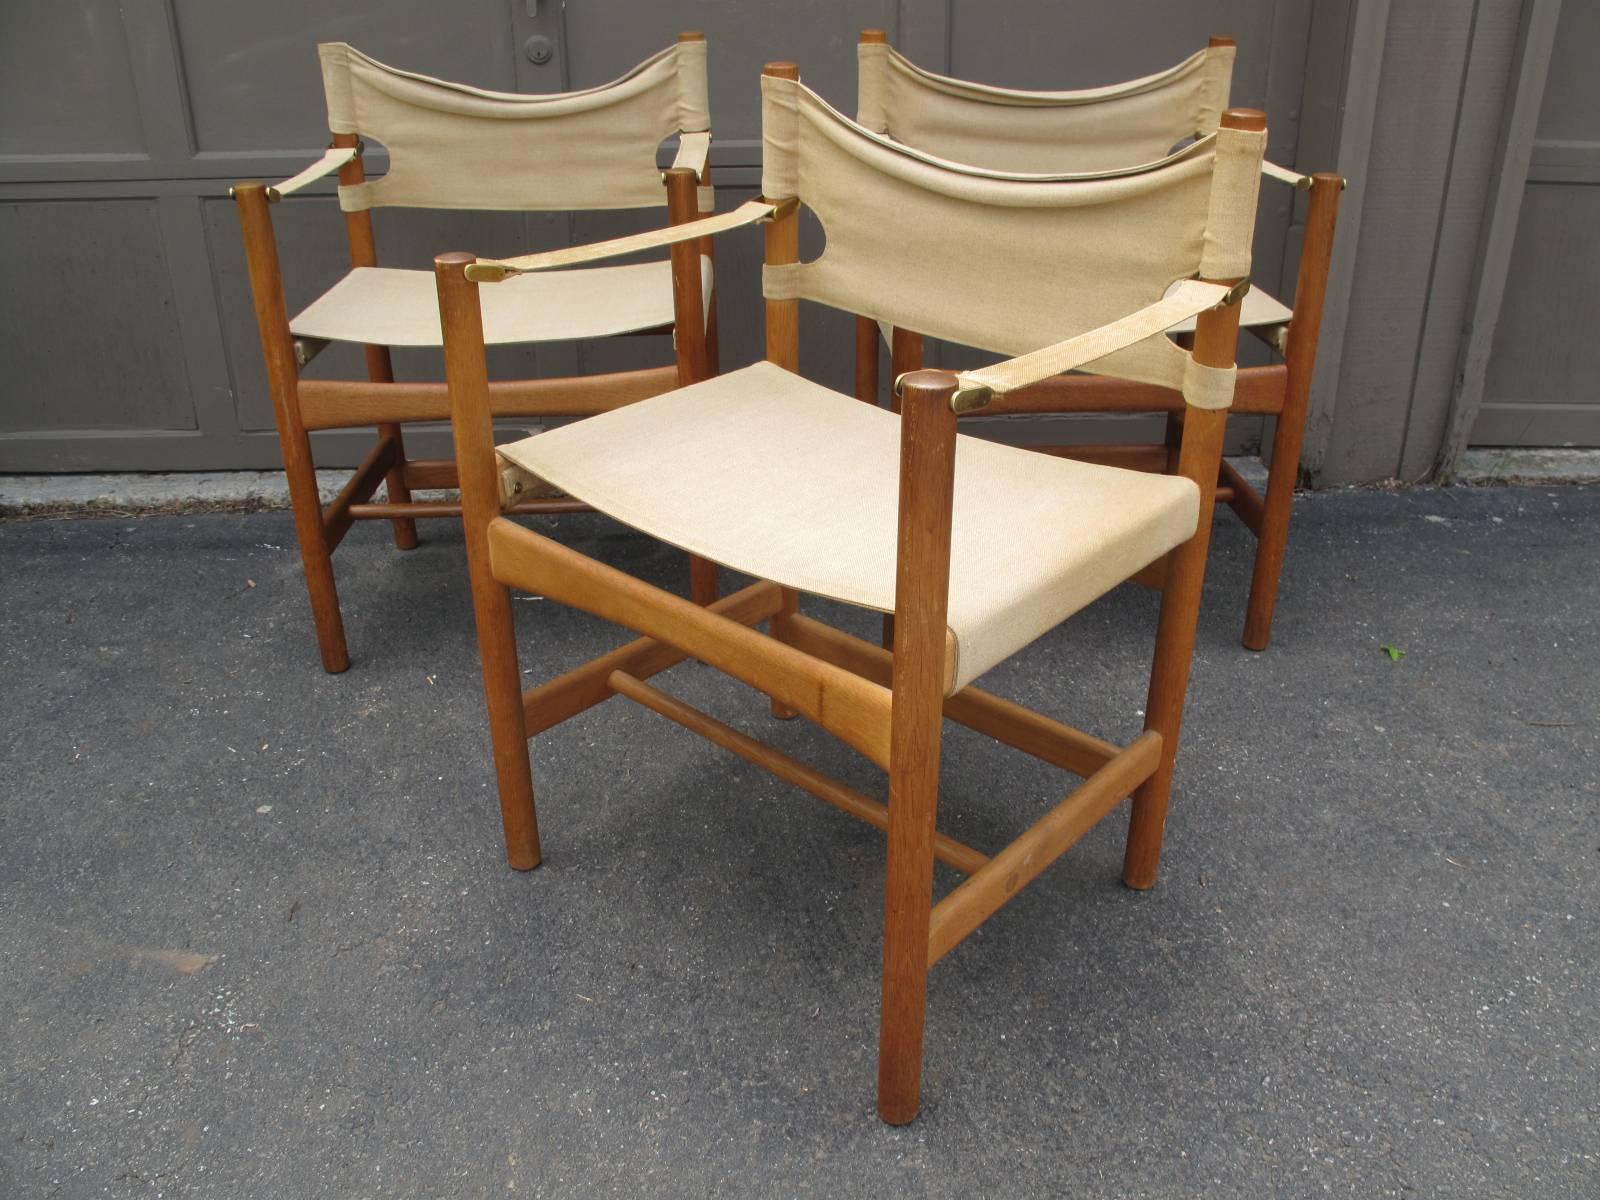 ONE remaining of the three pictured.  Designed by Danish designer Børge Mogensen for Fredericia.

Original canvas back, seat and arm rest. Brass fasteners. Original tags in tact as shown. 

